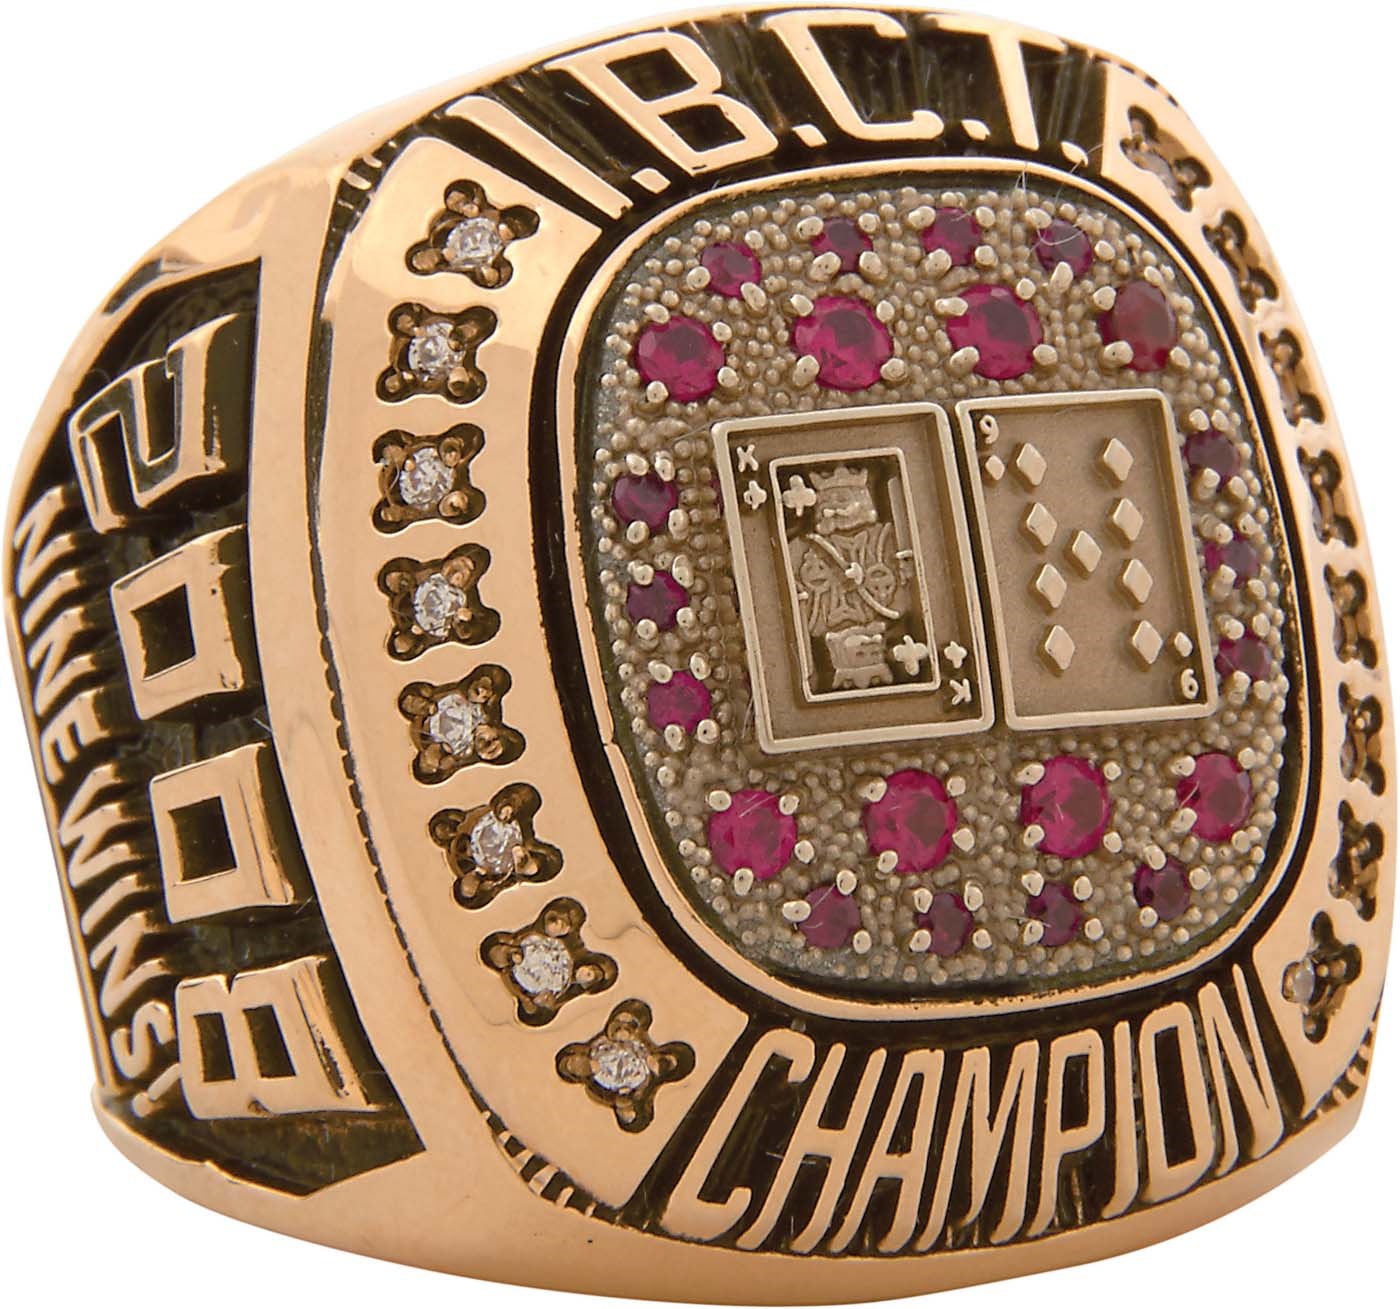 Sports Rings And Awards - 2008 Baccarat Championship Ring - Sourced from Tournament Owner